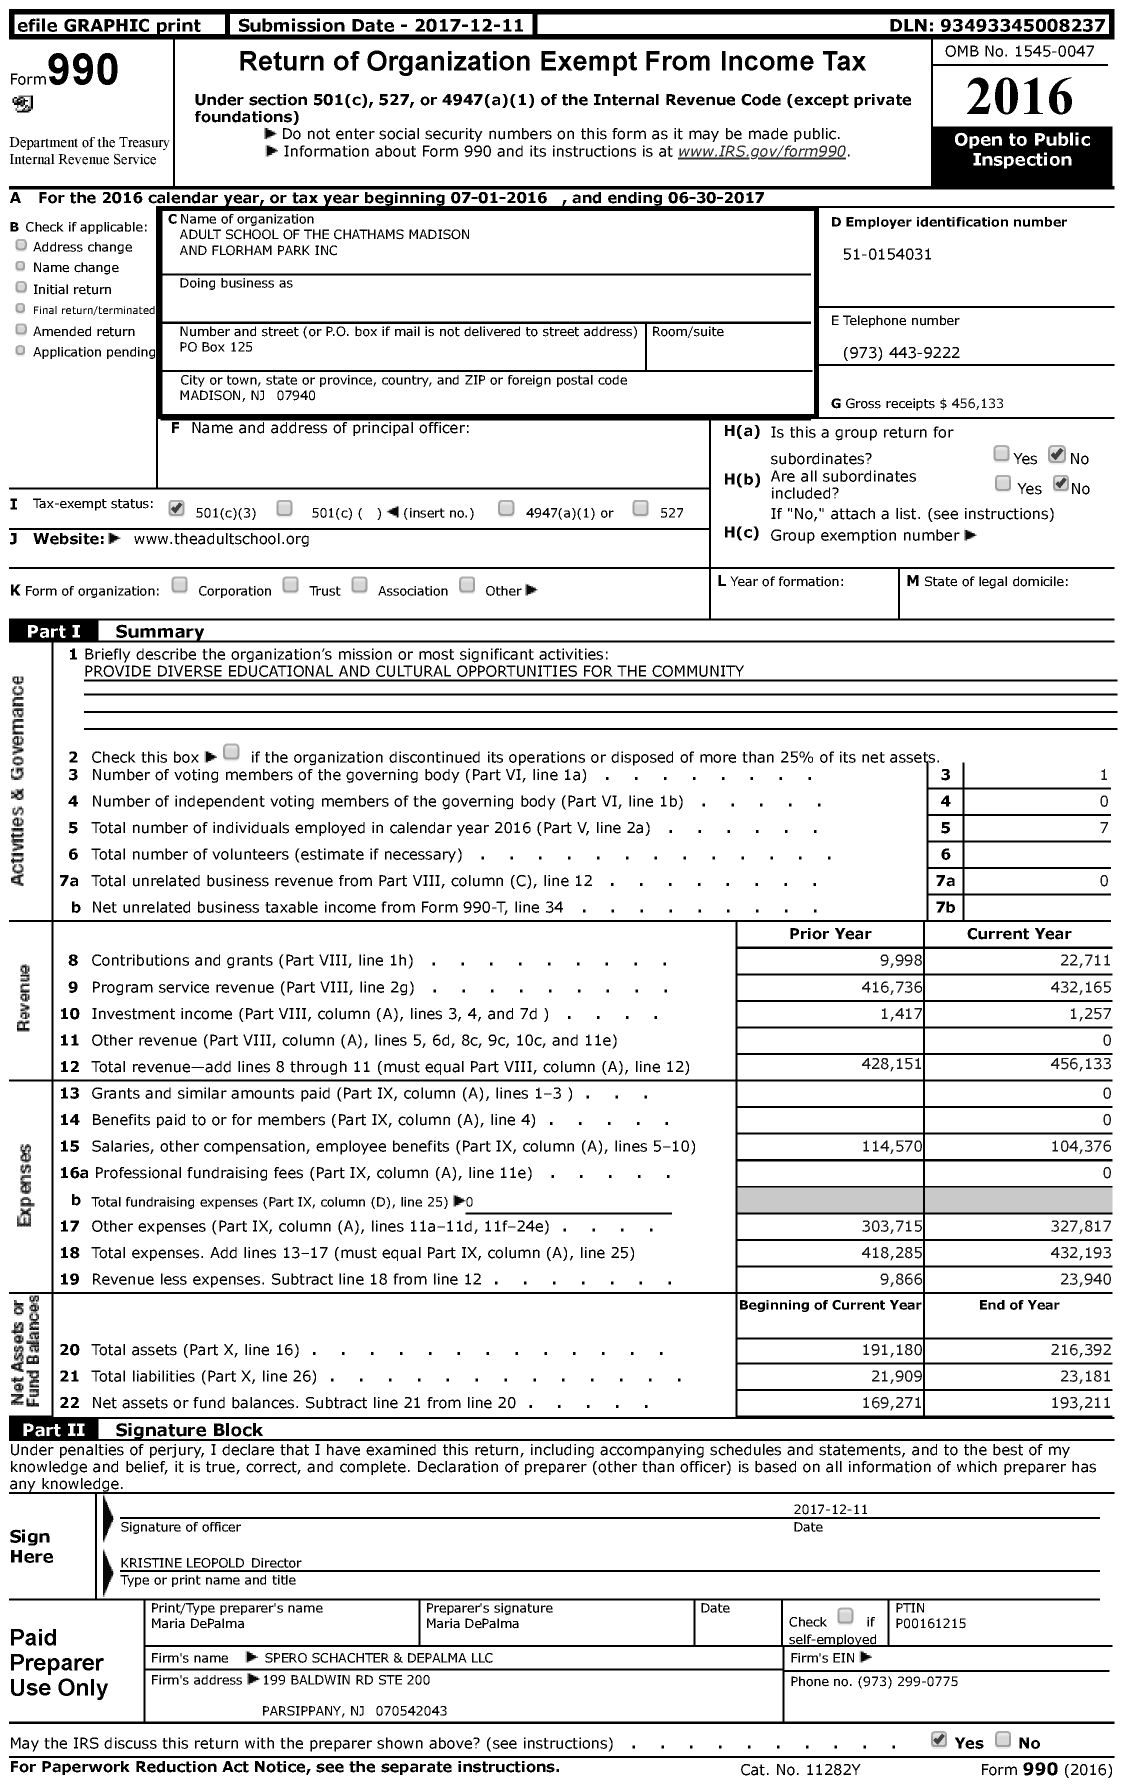 Image of first page of 2016 Form 990 for Adult School of the Chathams Madison and Florham Park